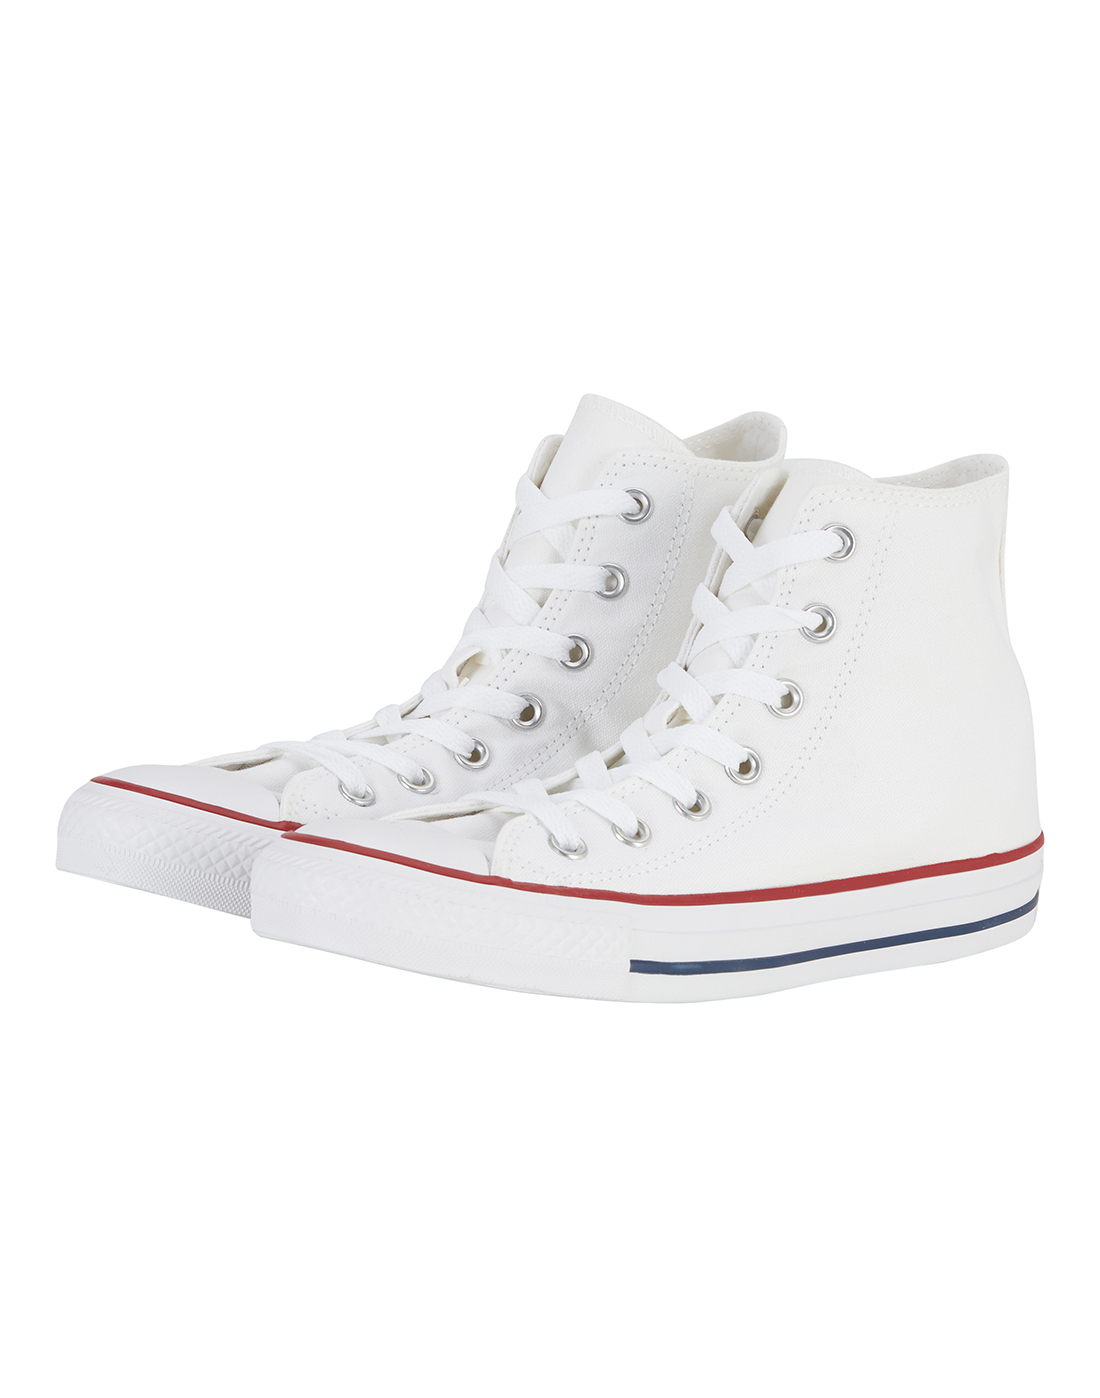 Converse Womens Chuck Taylor All Star Hi - White | Life Style Sports IE